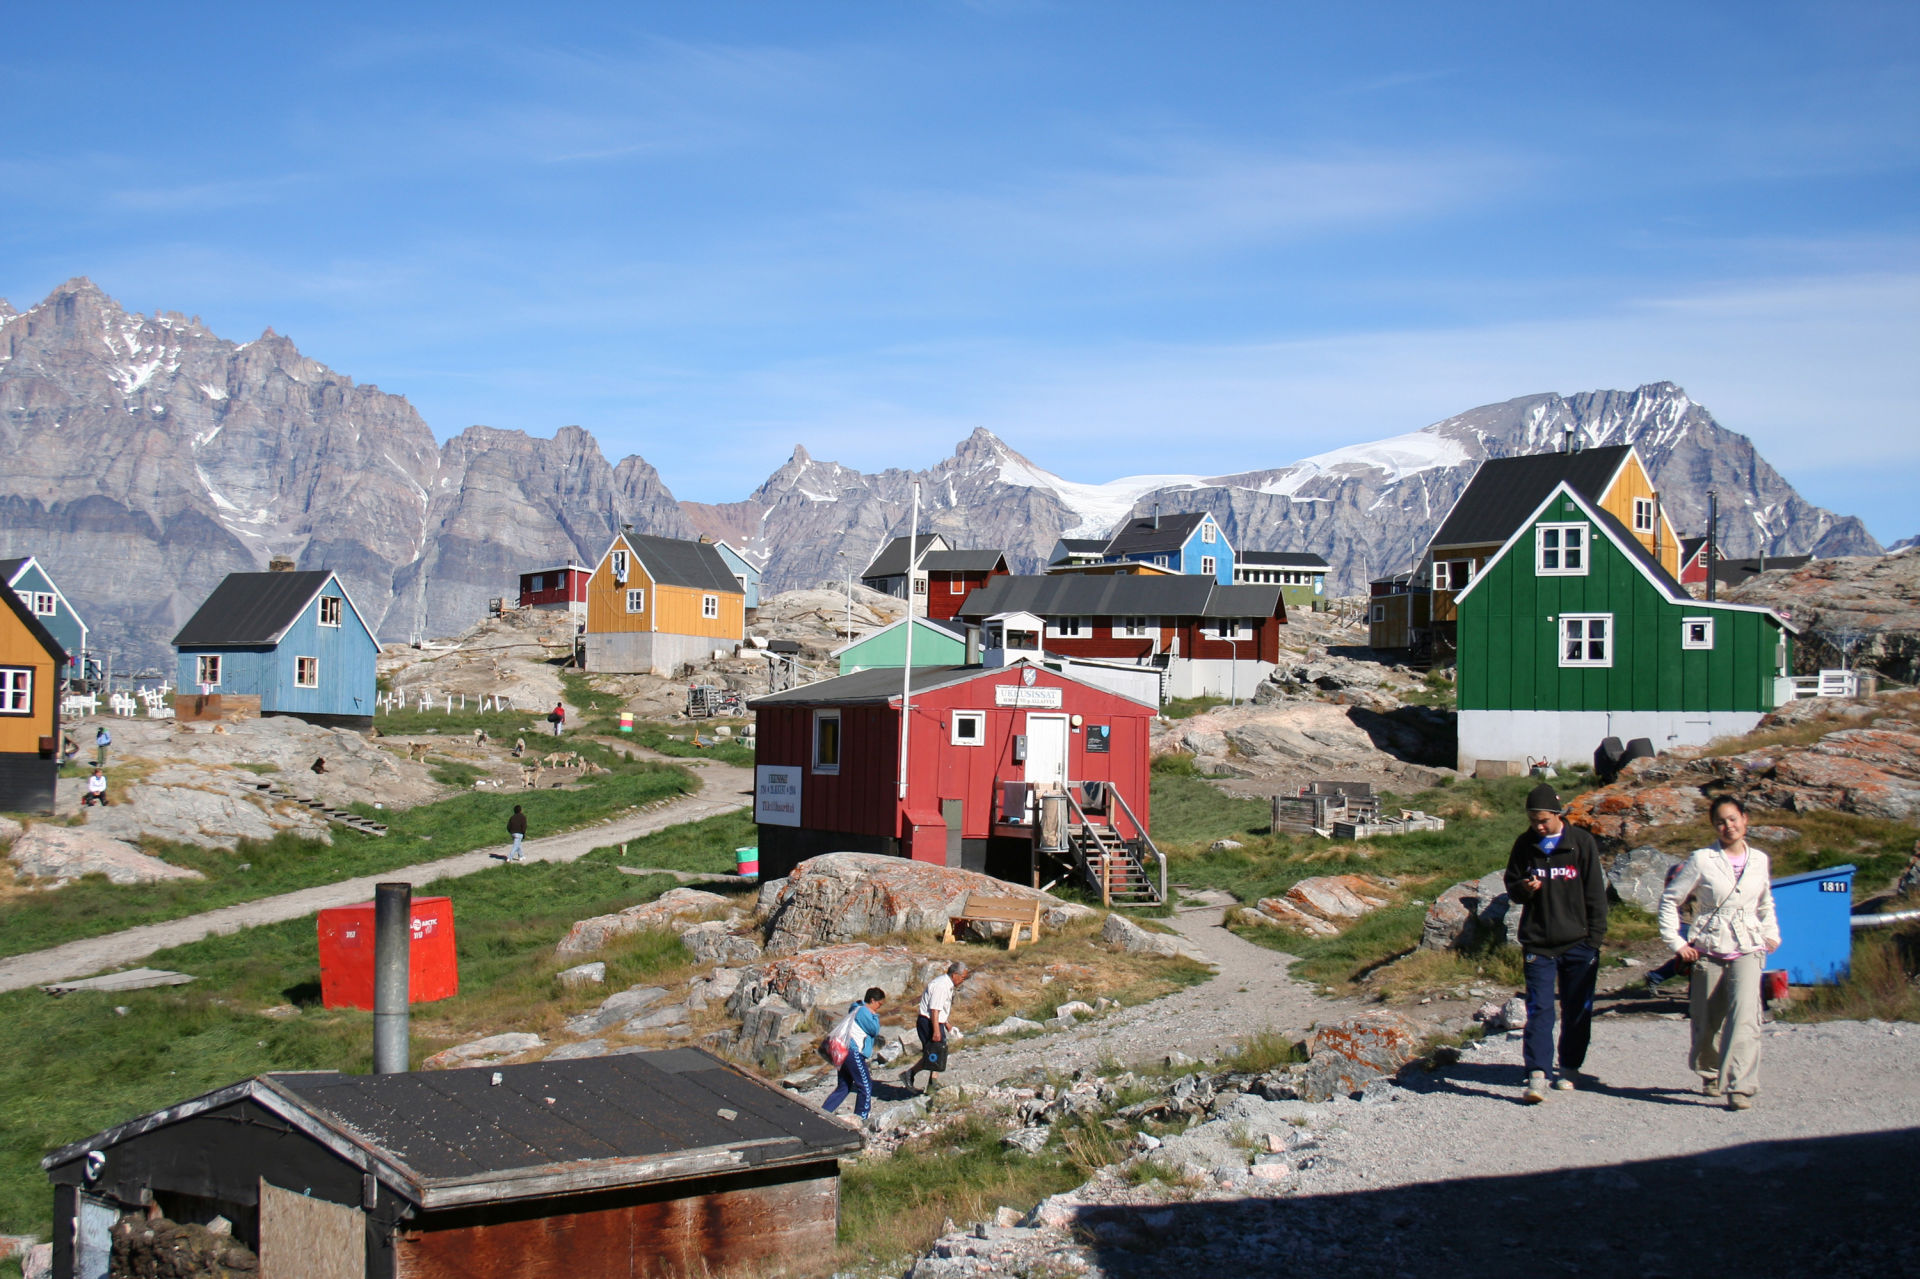 The village of Ukkusissat, Greenland, near where the researchers conducted their study of the Inuit diet.